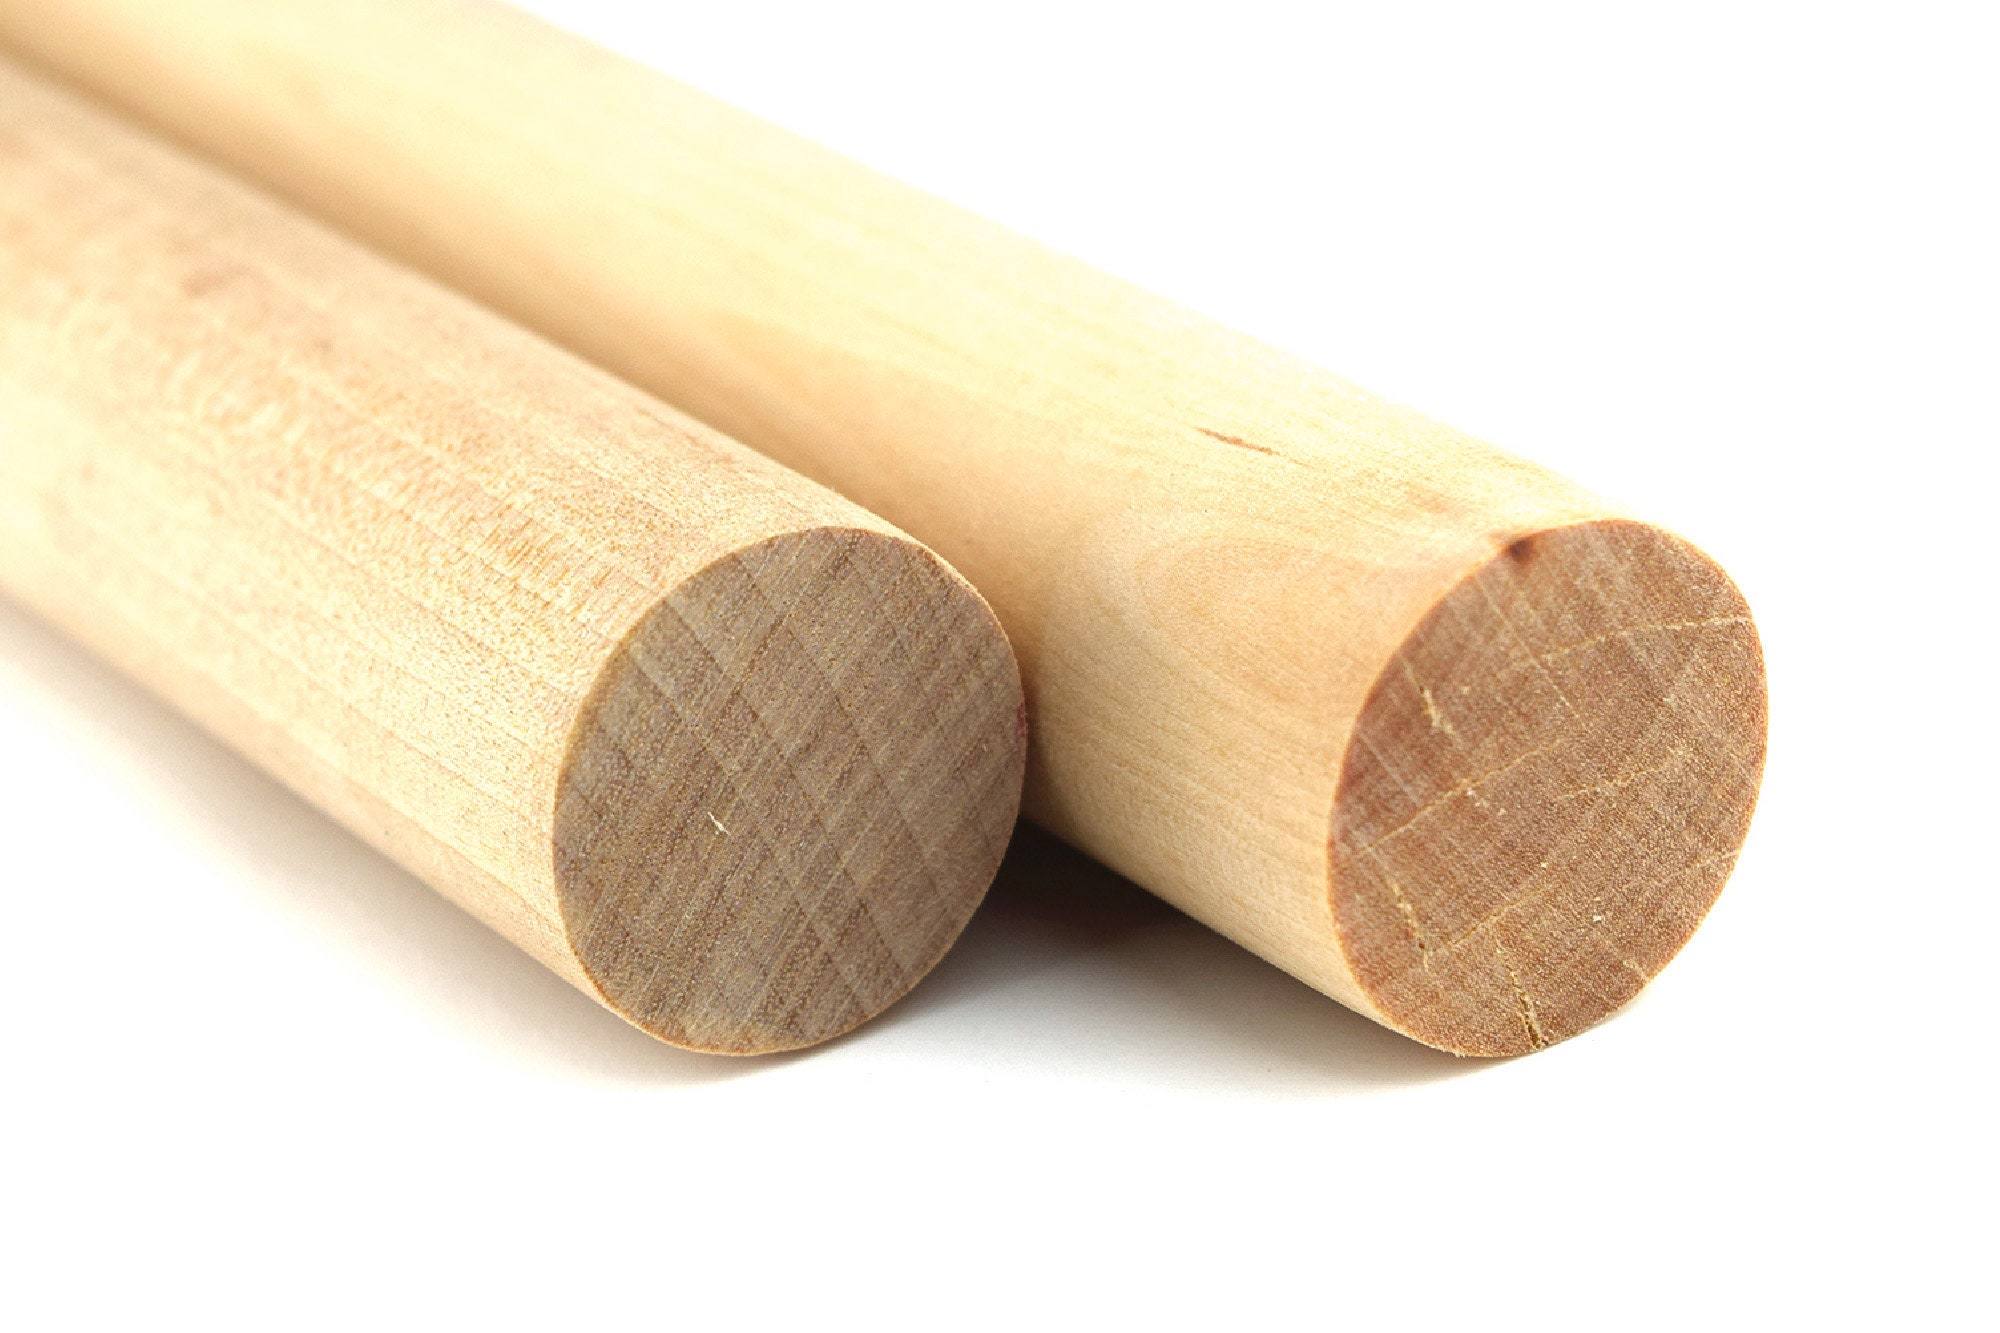 Custom Wood Dowels - Made in USA - Made To Spec